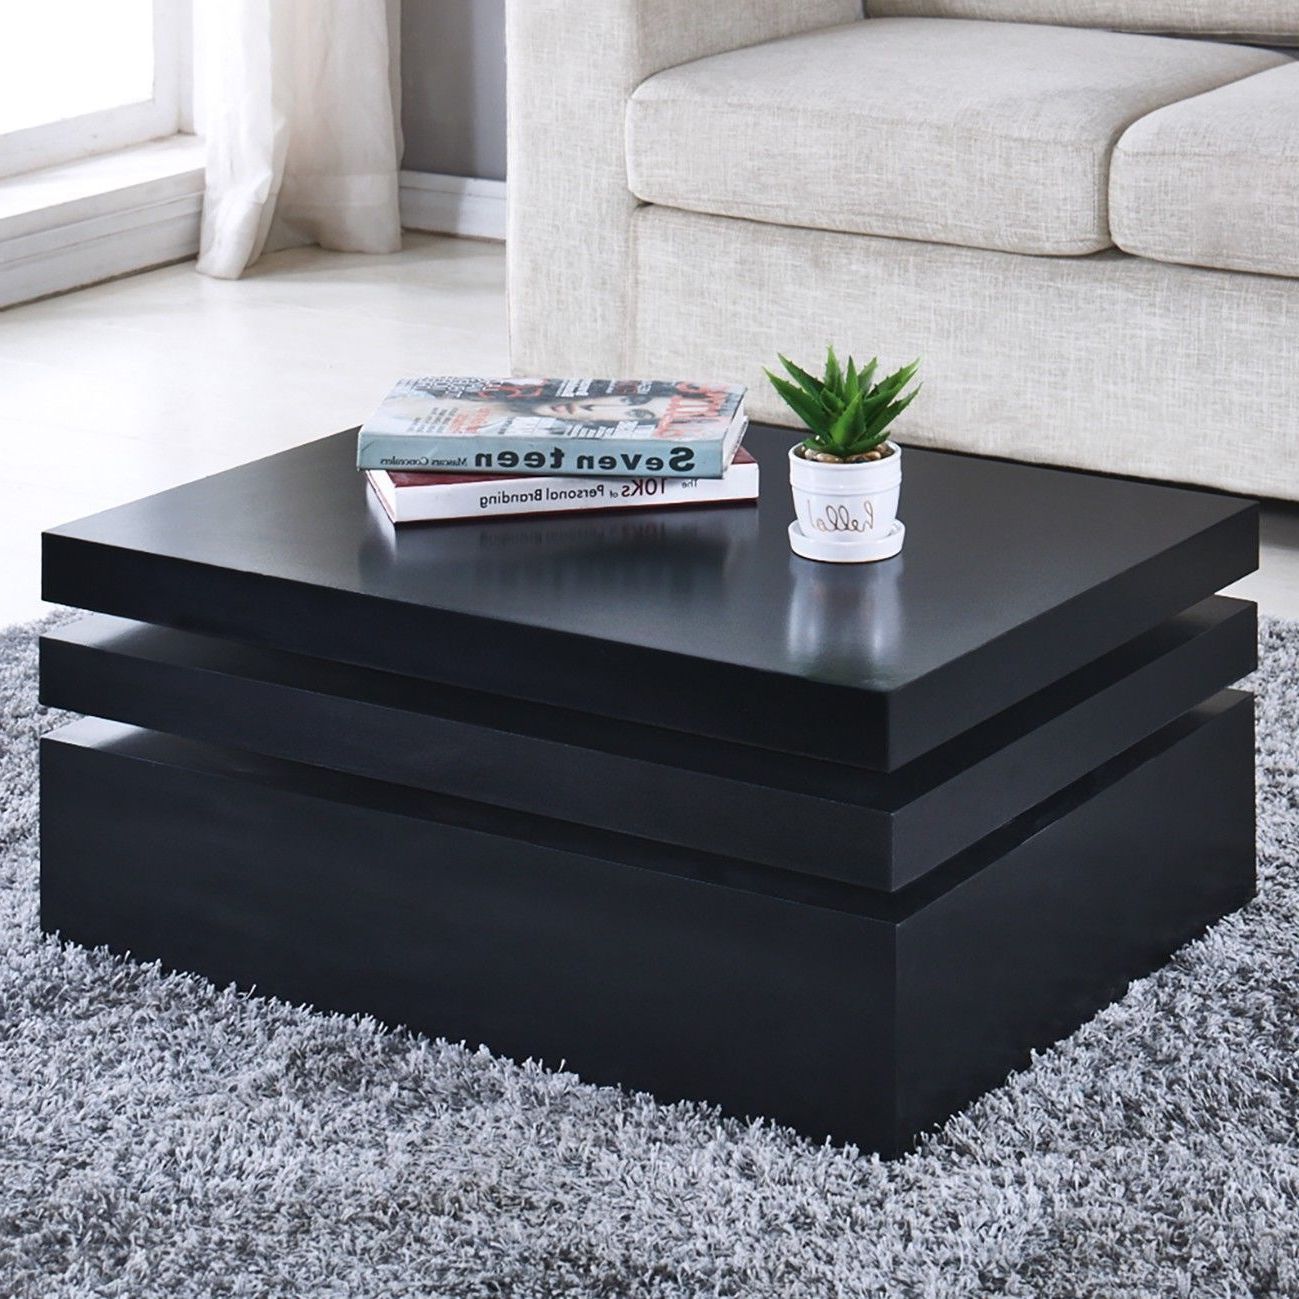 Most Recent Square High Gloss Coffee Tables In Small Square Coffee Table High Gloss Furniture Modern (View 8 of 20)